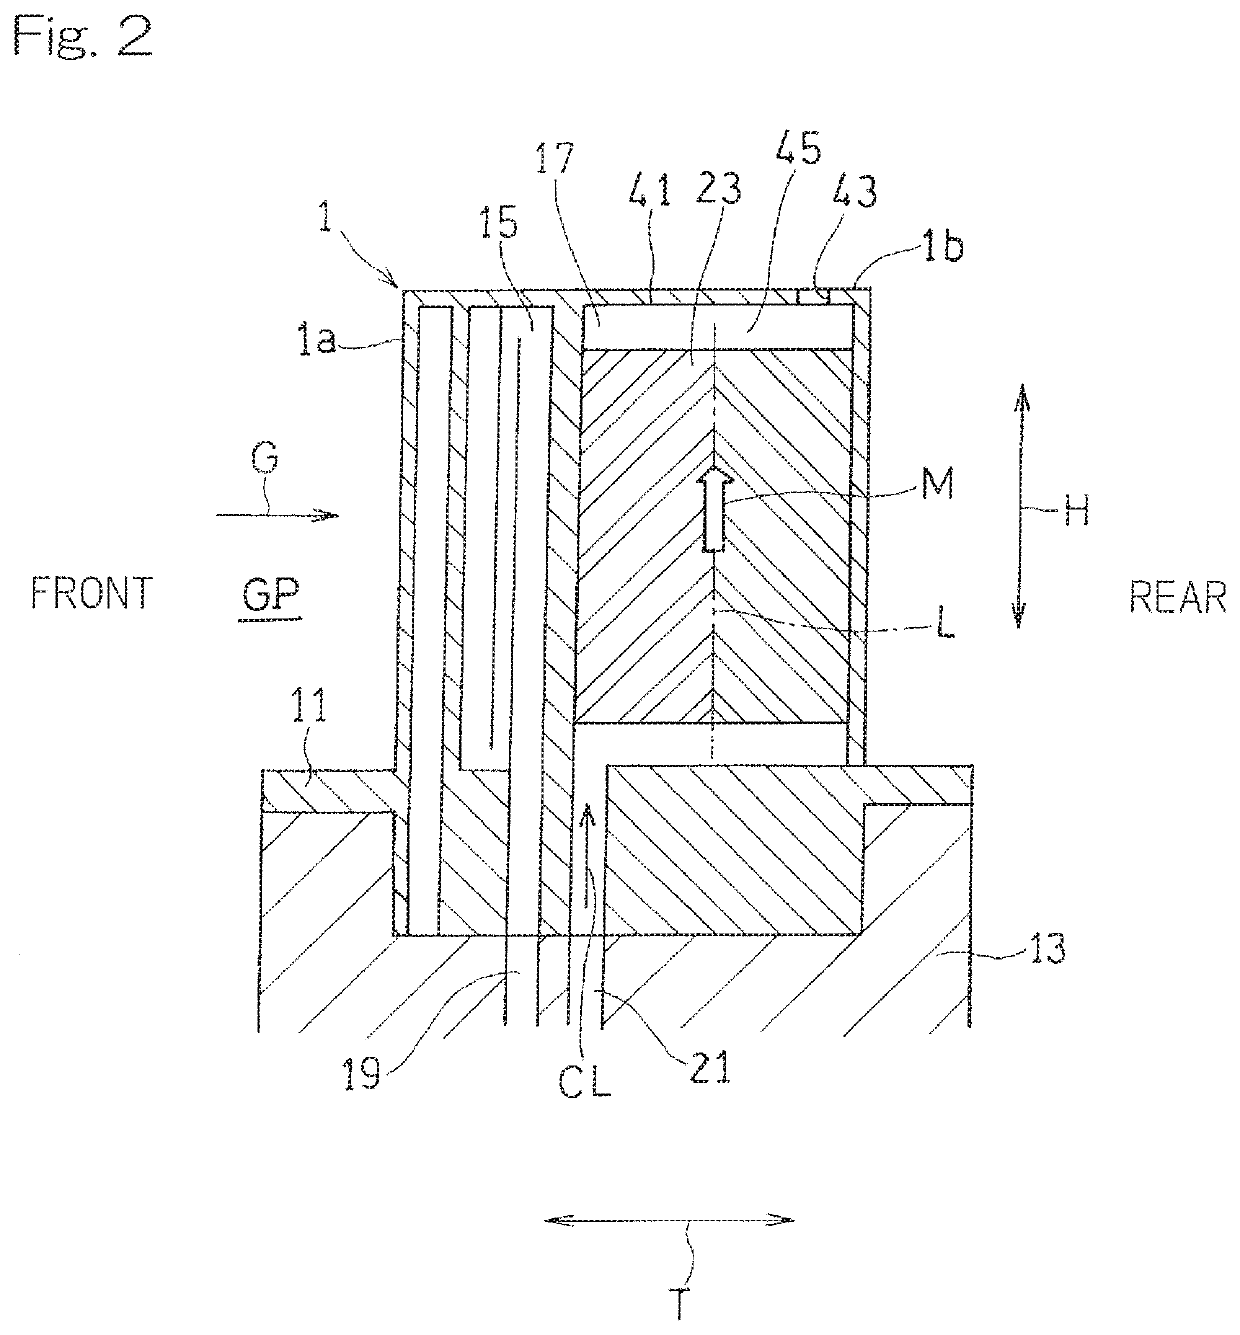 Cooling structure for turbine airfoil